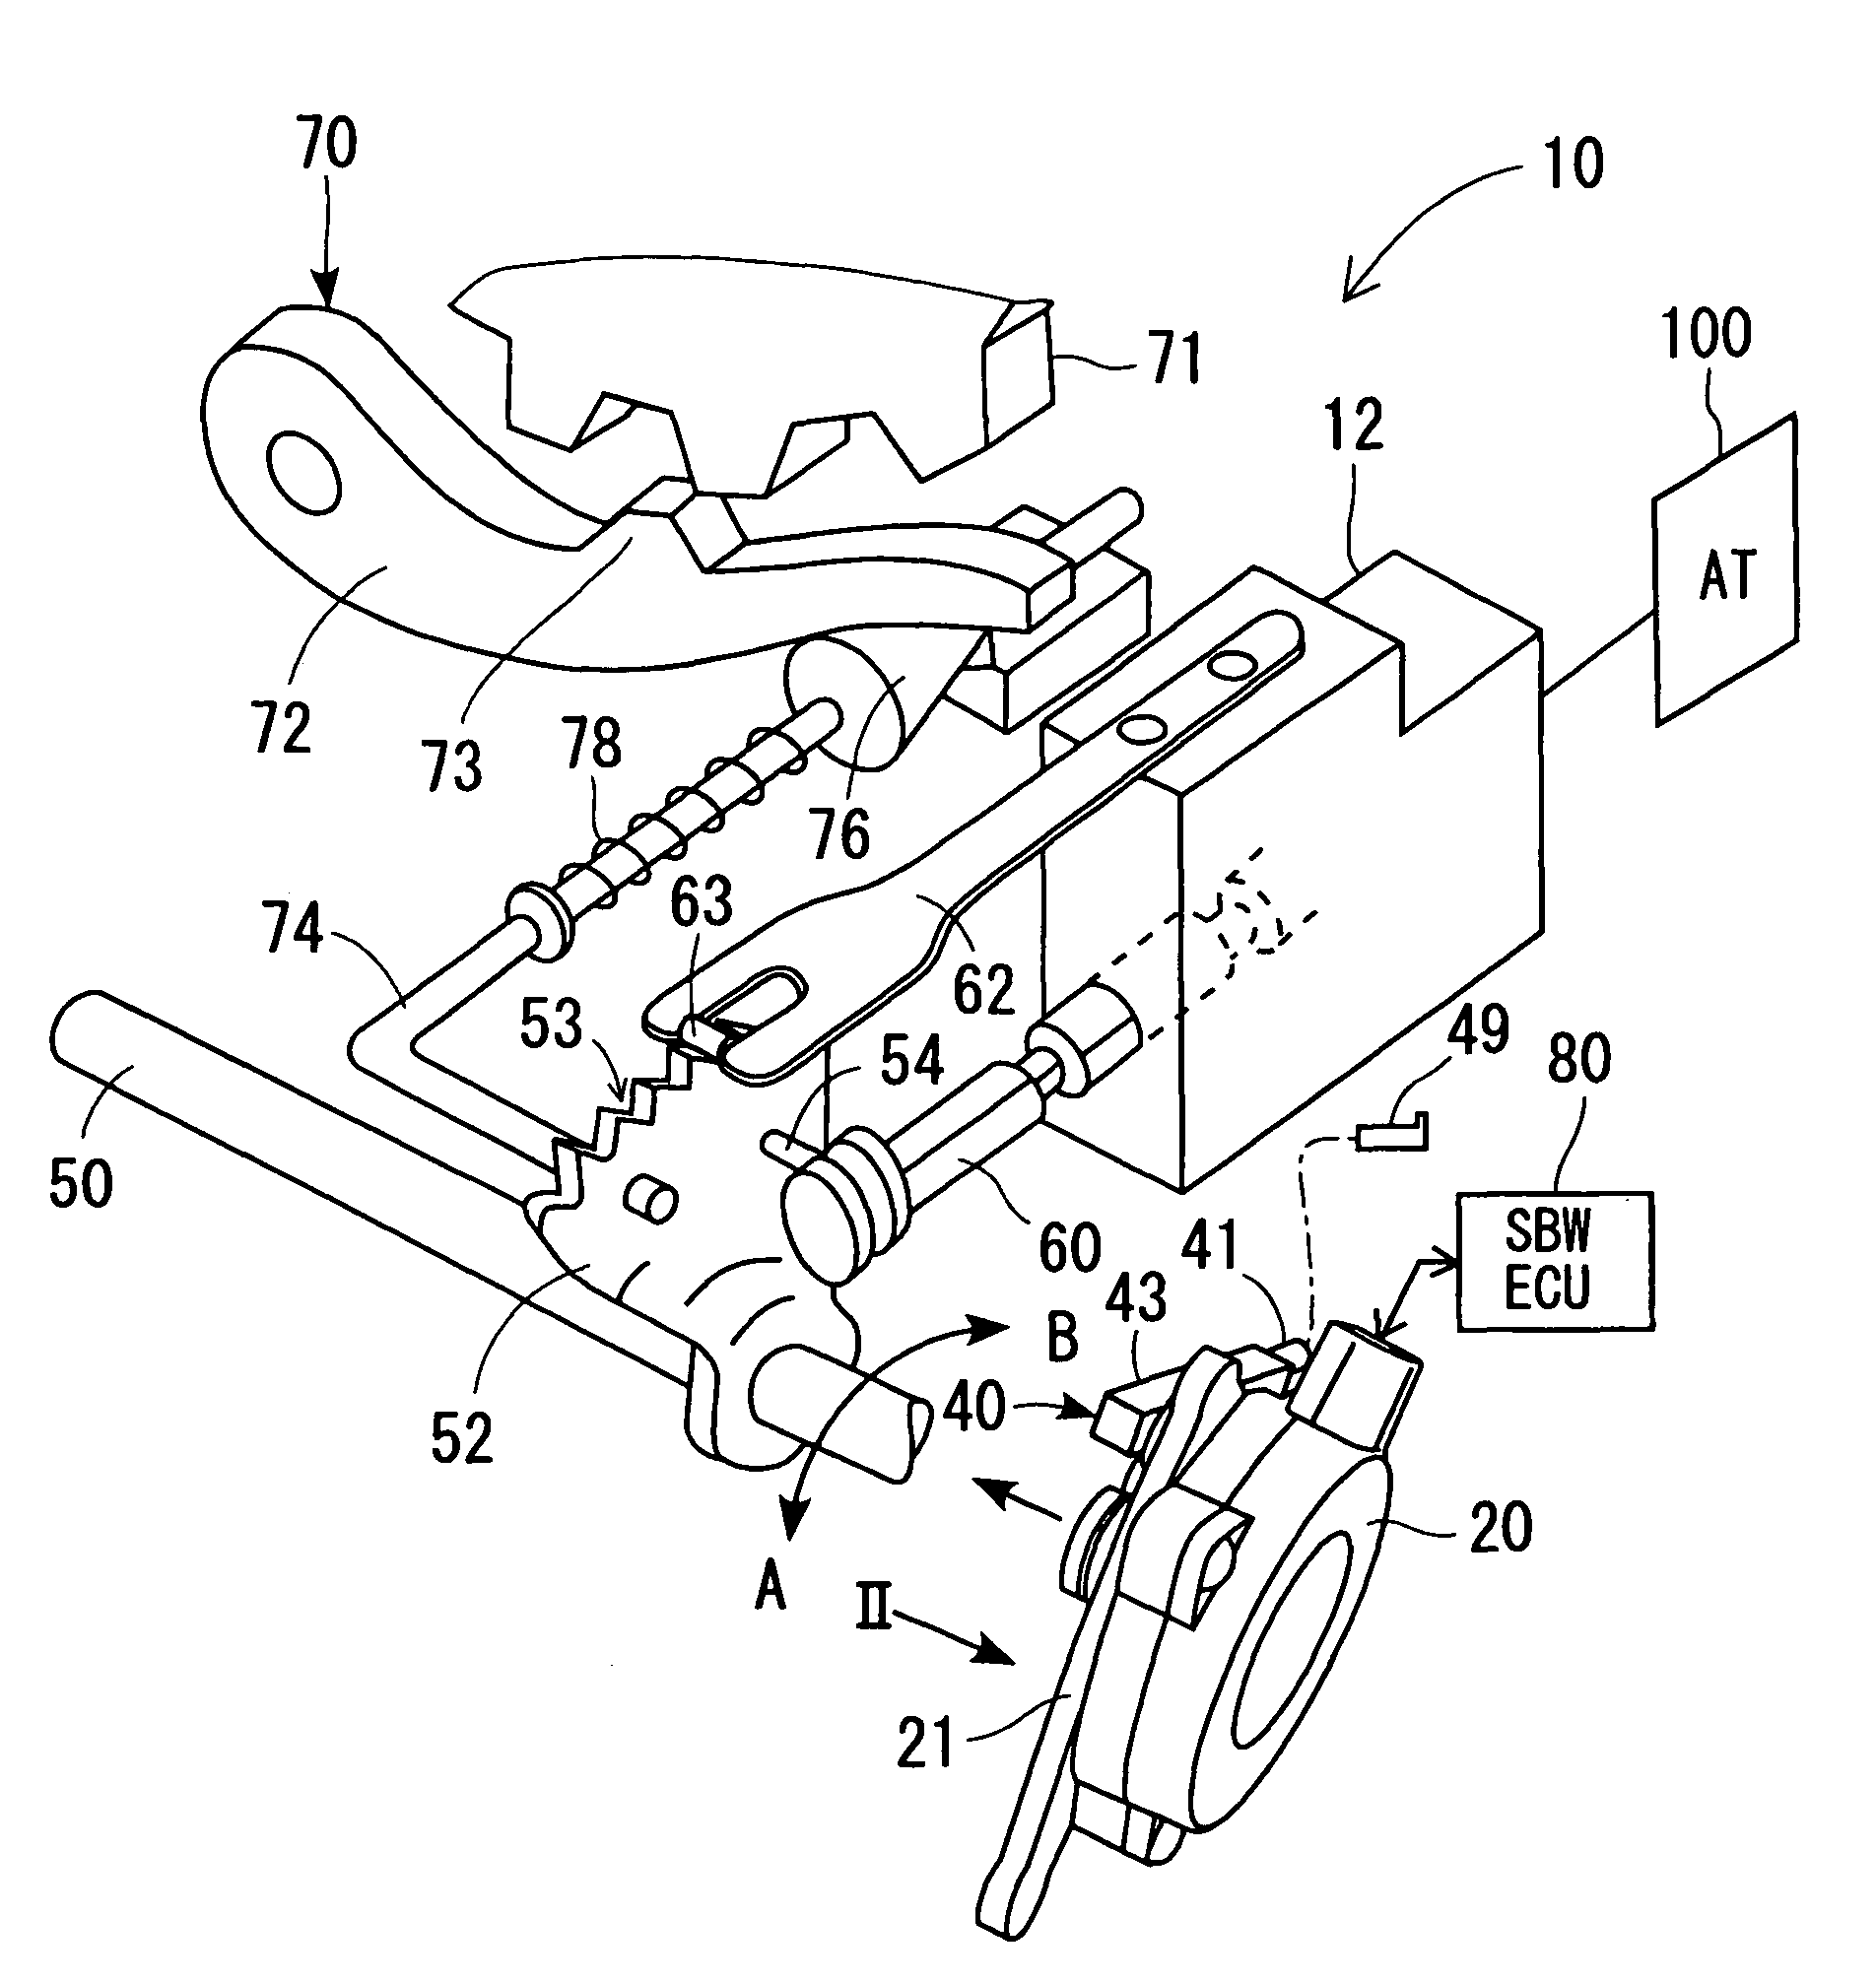 Shift-by-wire control system for automatic transmission device and method for the same